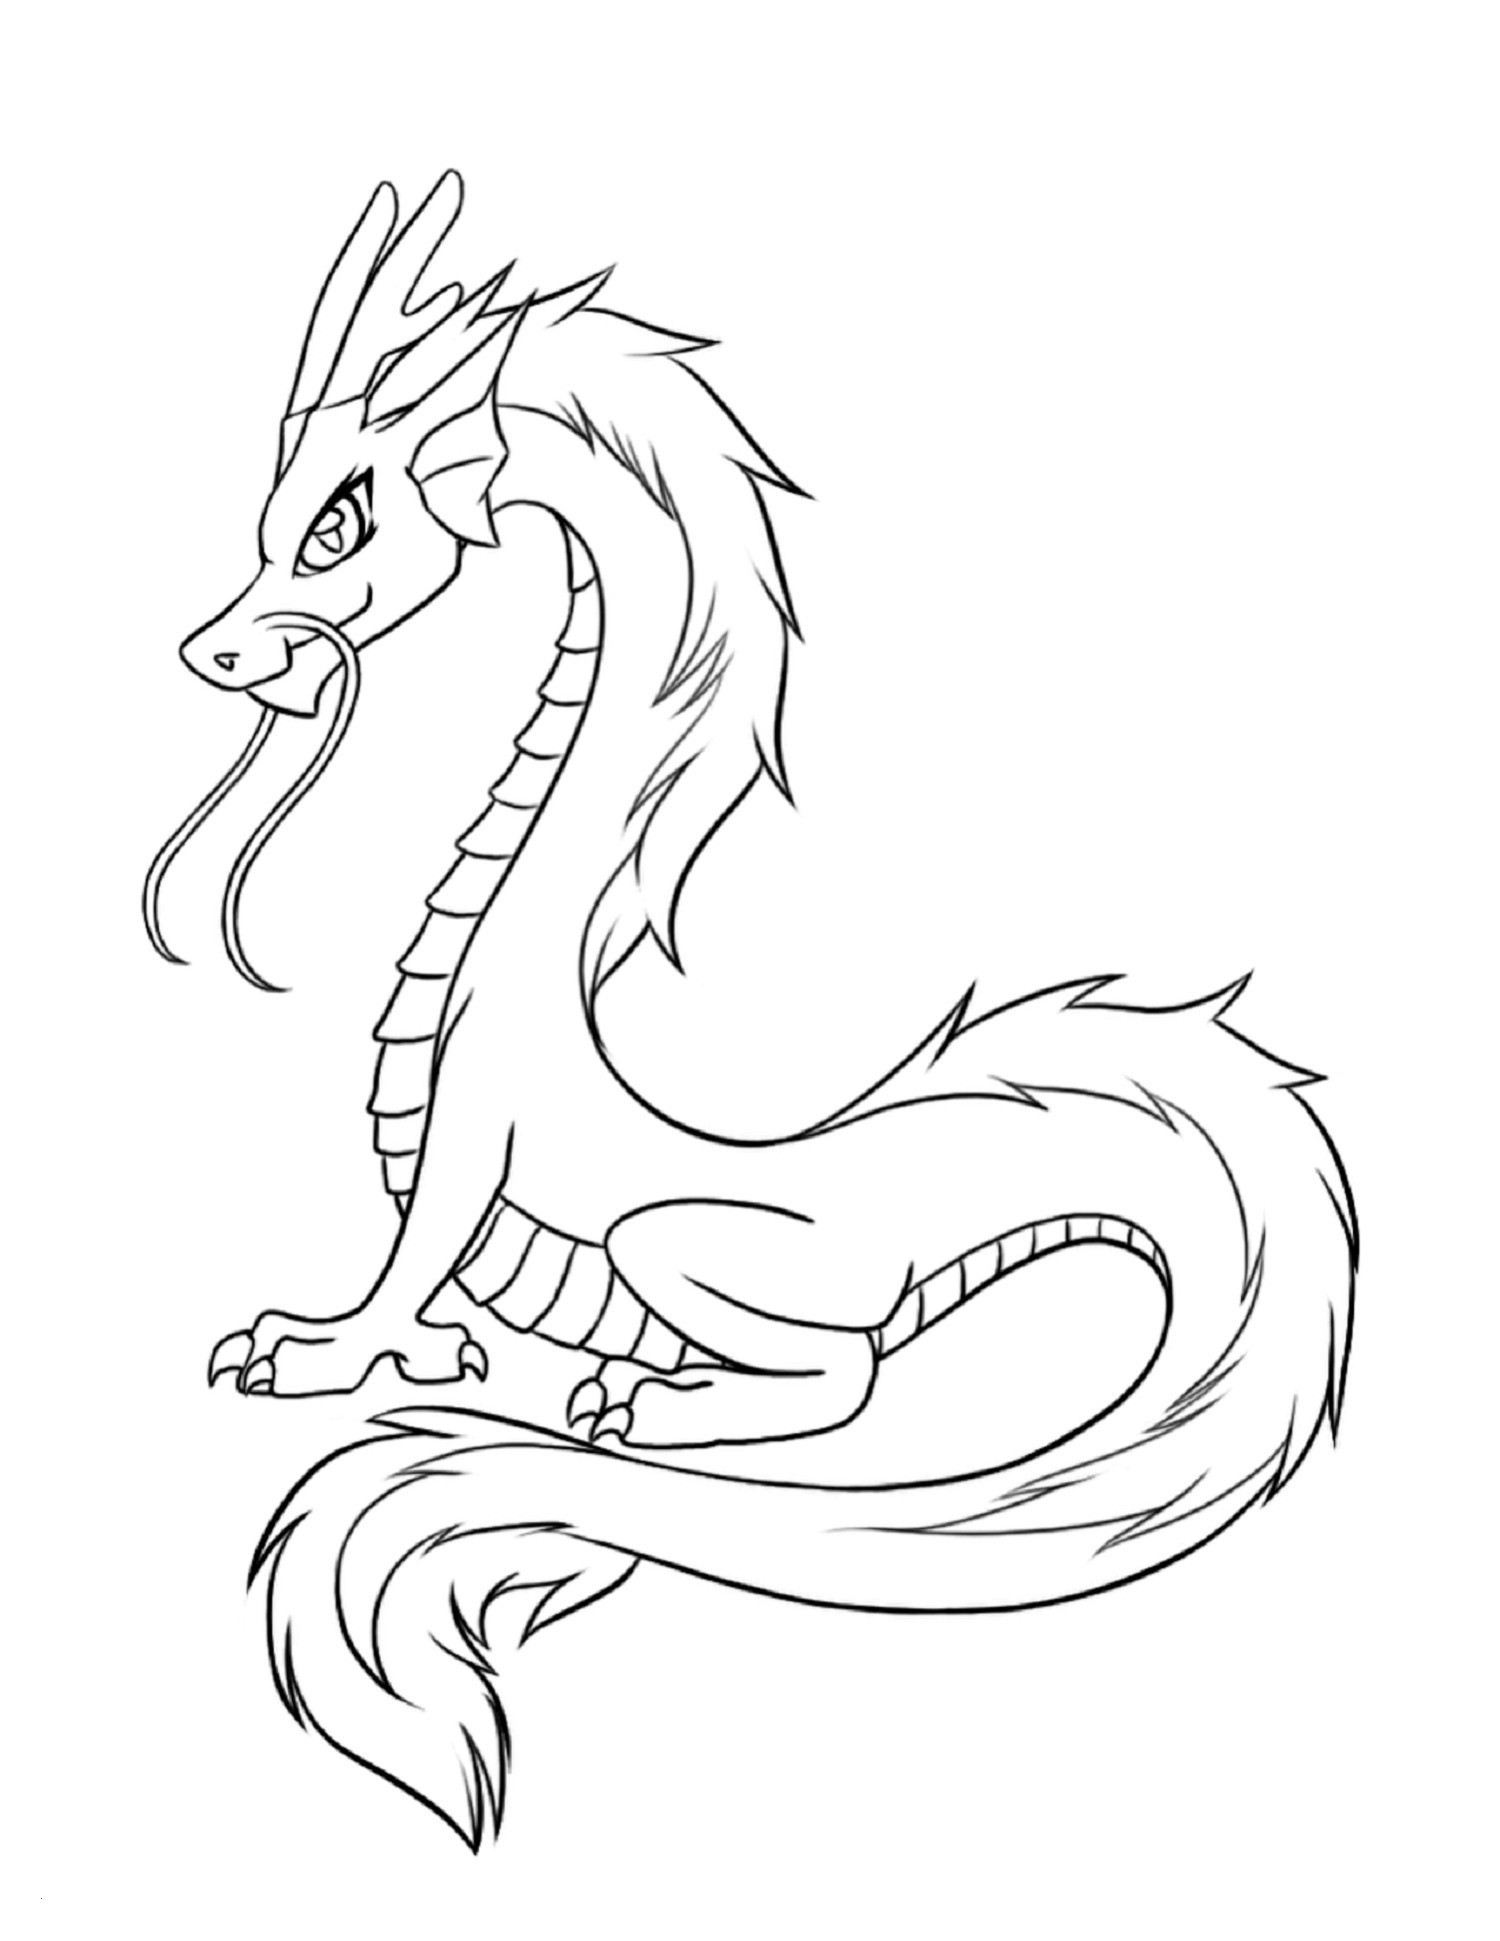 Dragon Coloring Games Inspirational 43 Elegant Stock Chinese Dragon Coloring Pages